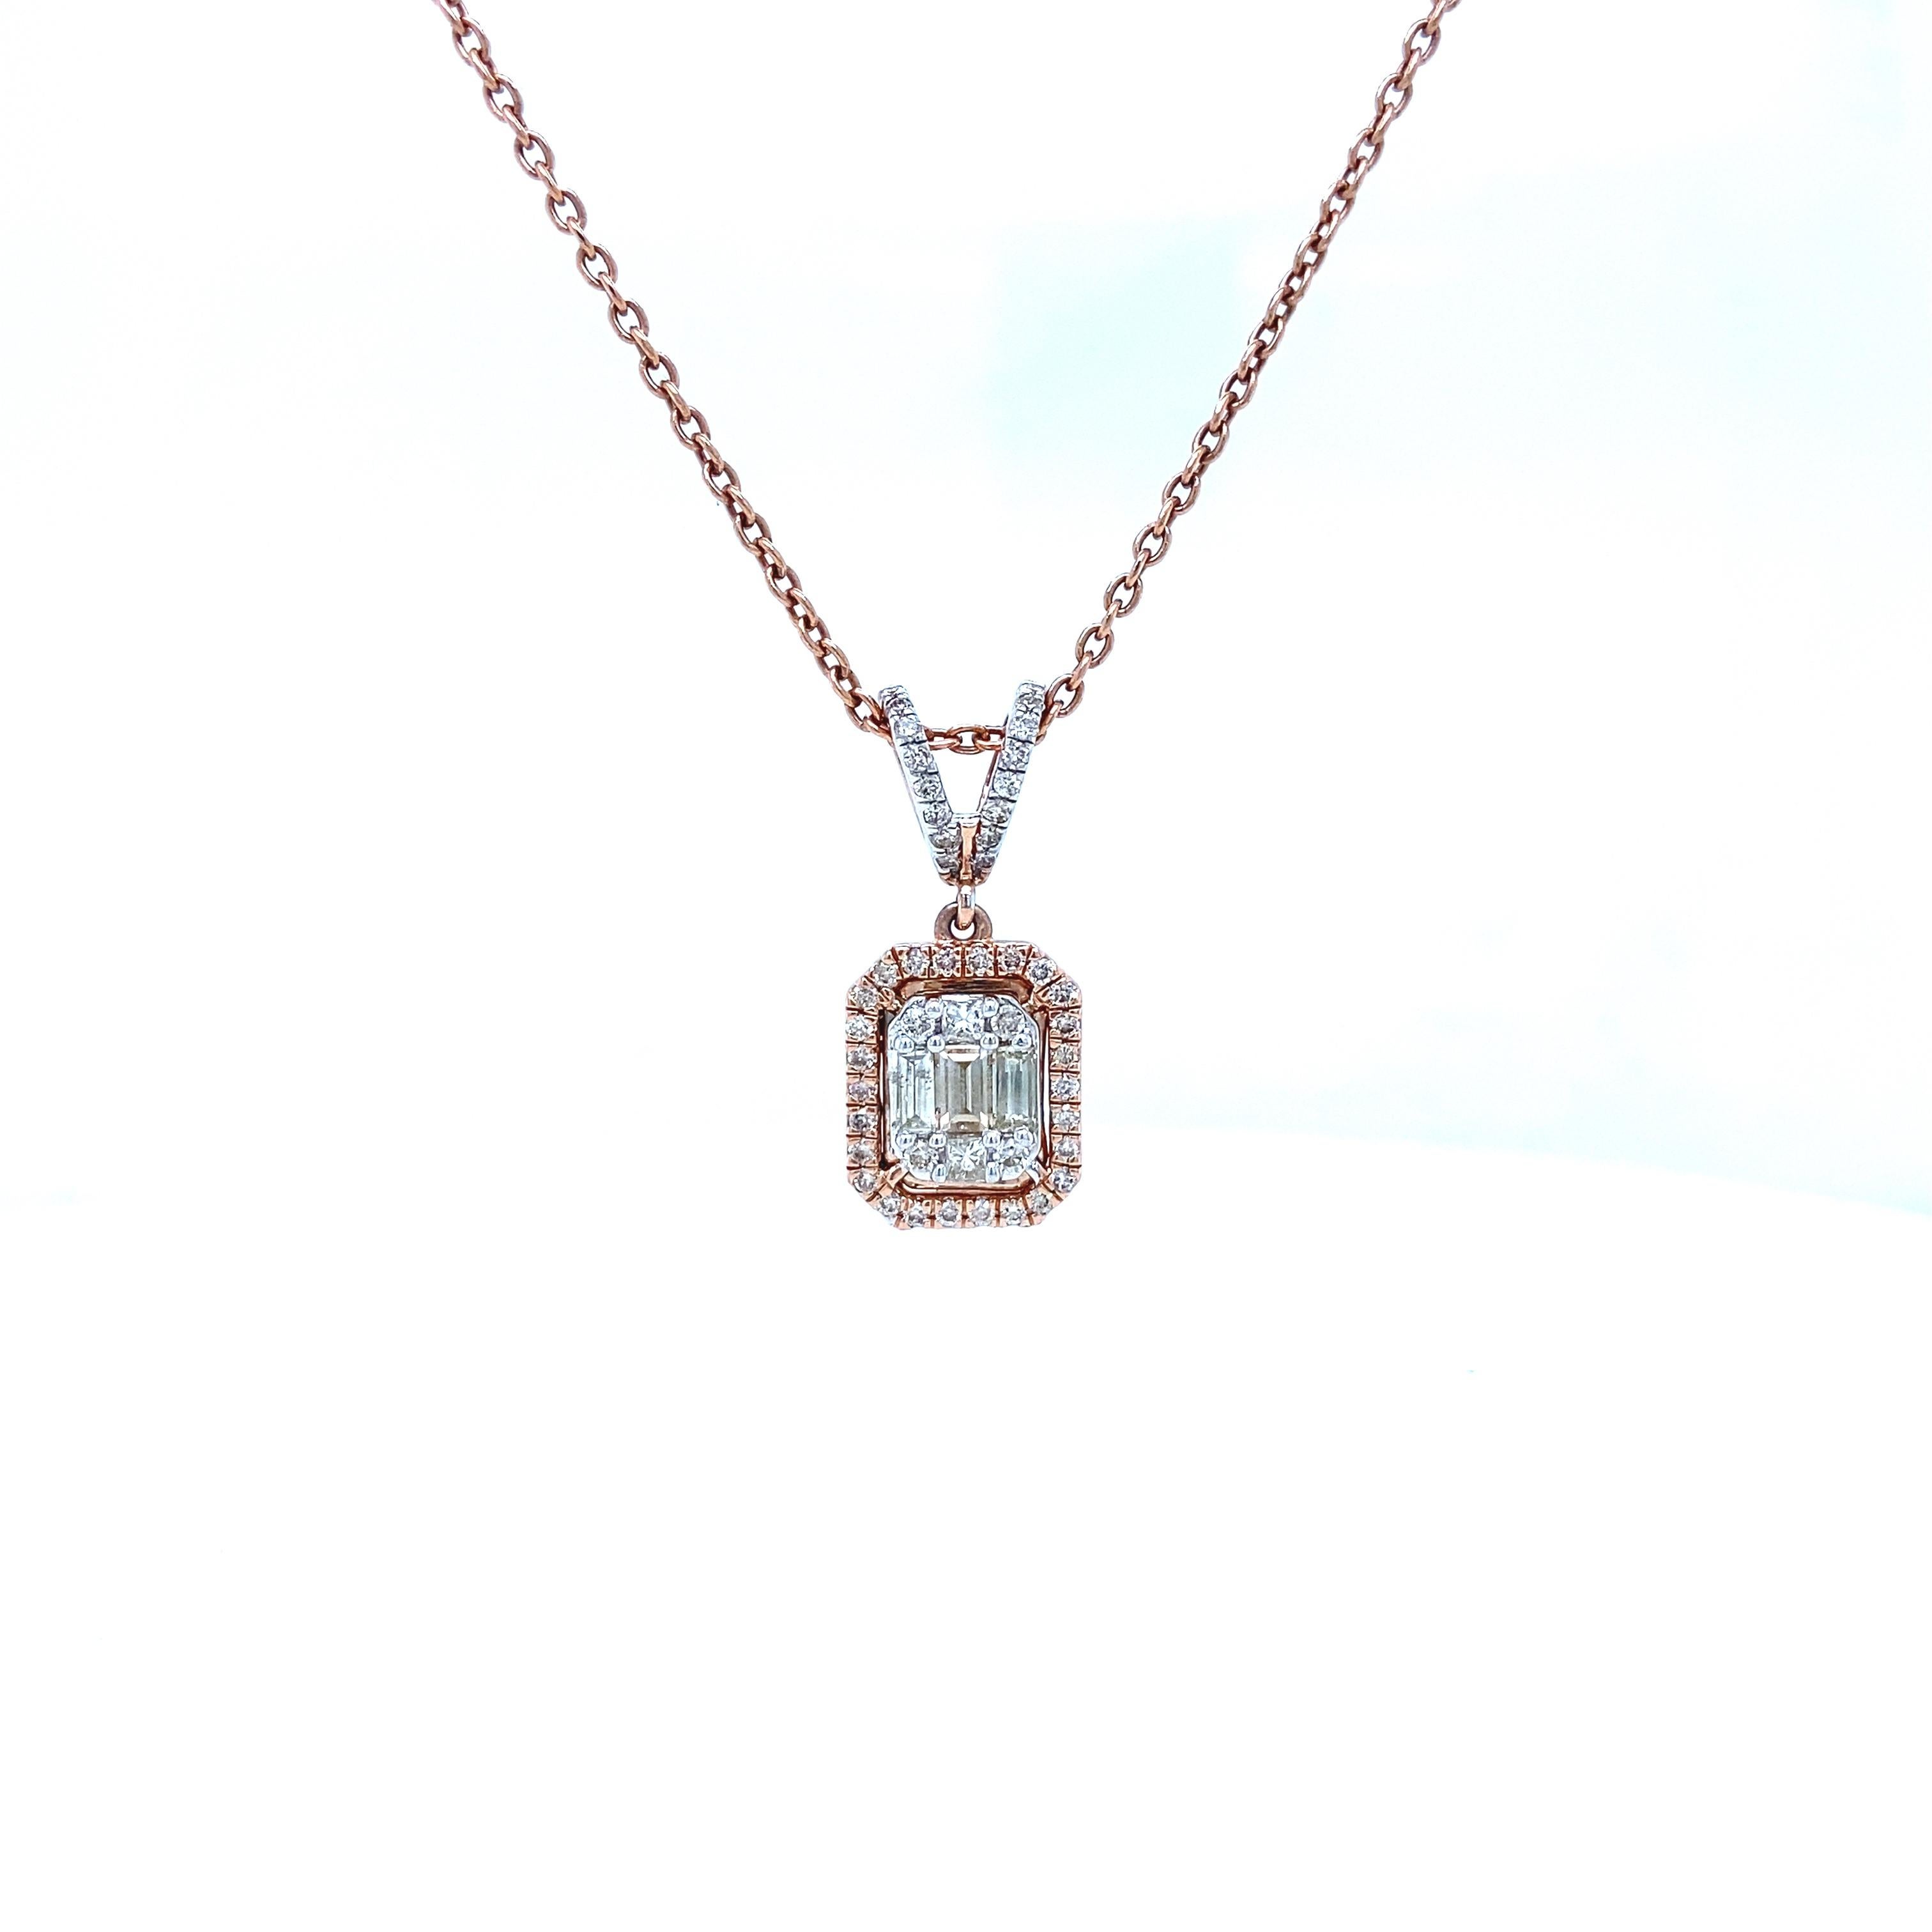 Introducing our Rectangular Design Fancy Diamonds Pendant Necklace, a striking fusion of modern elegance and timeless luxury. Crafted in opulent 18K solid gold, the pendant features an exquisite arrangement of fancy diamonds, including captivating